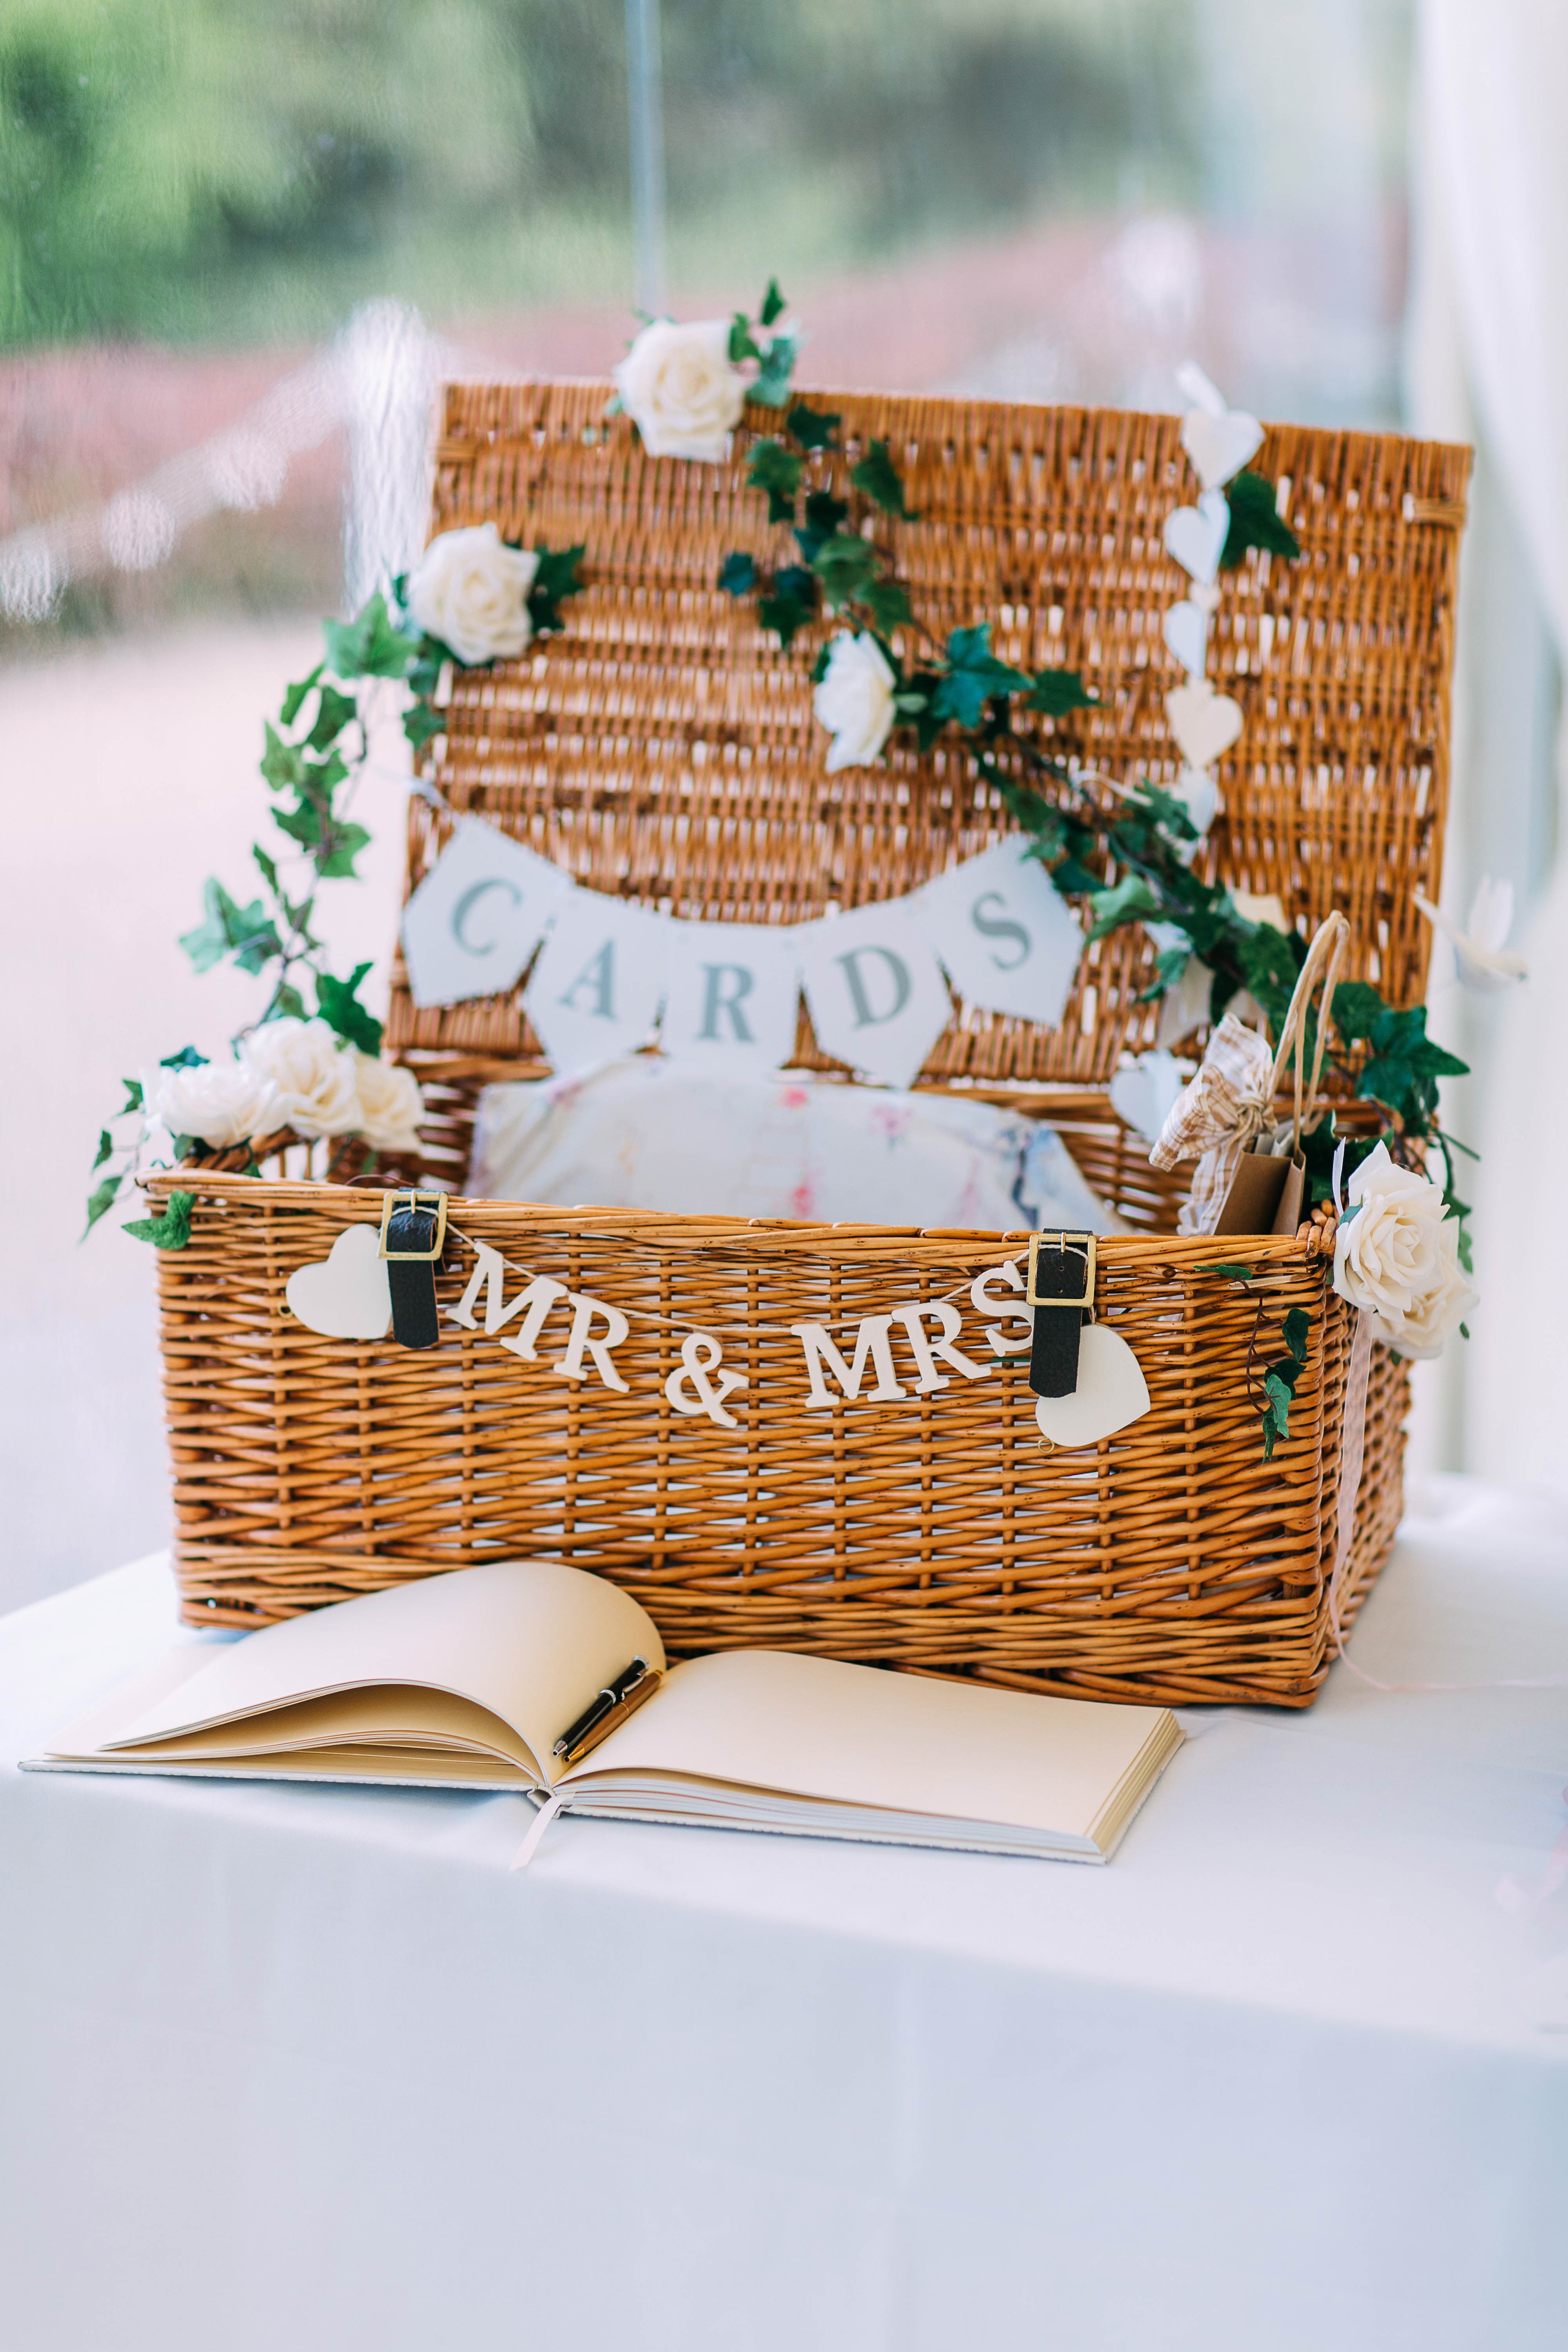 21-ways-to-set-up-a-card-or-gift-table-at-your-wedding-martha-stewart